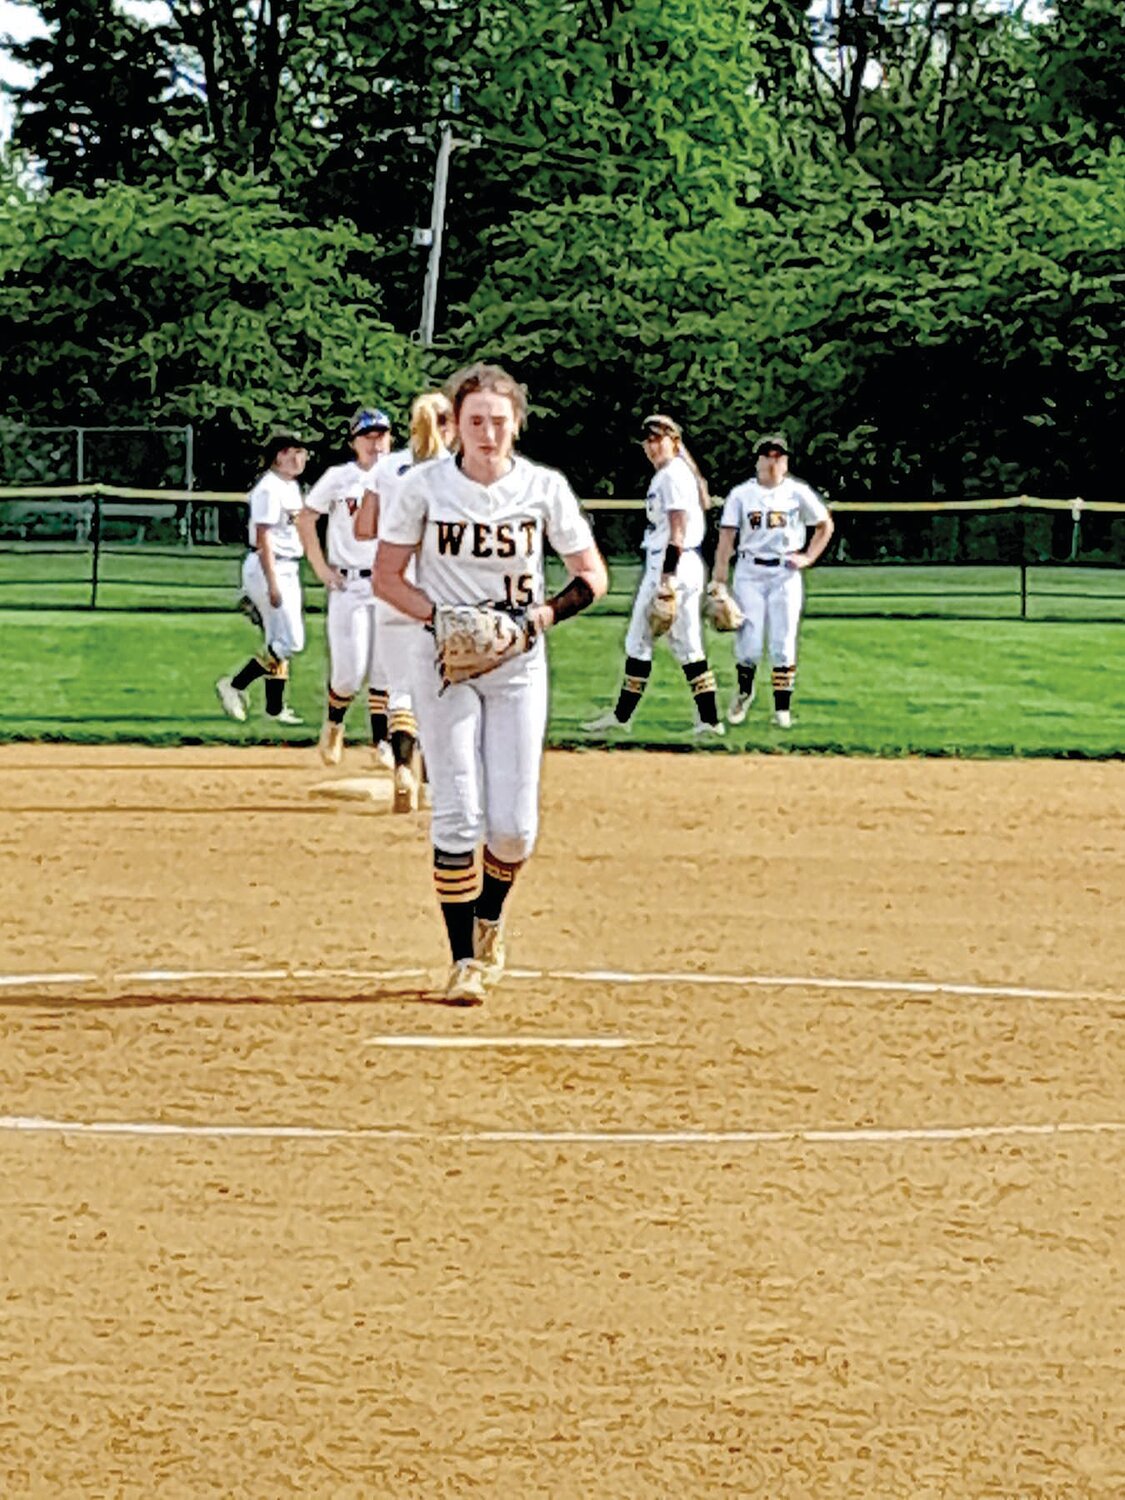 Central Bucks West pitcher Sienna Lawson struck out 11 batters and allowed only two hits in Monday’s 12-2 District One 6A tournament victory over Ridley.